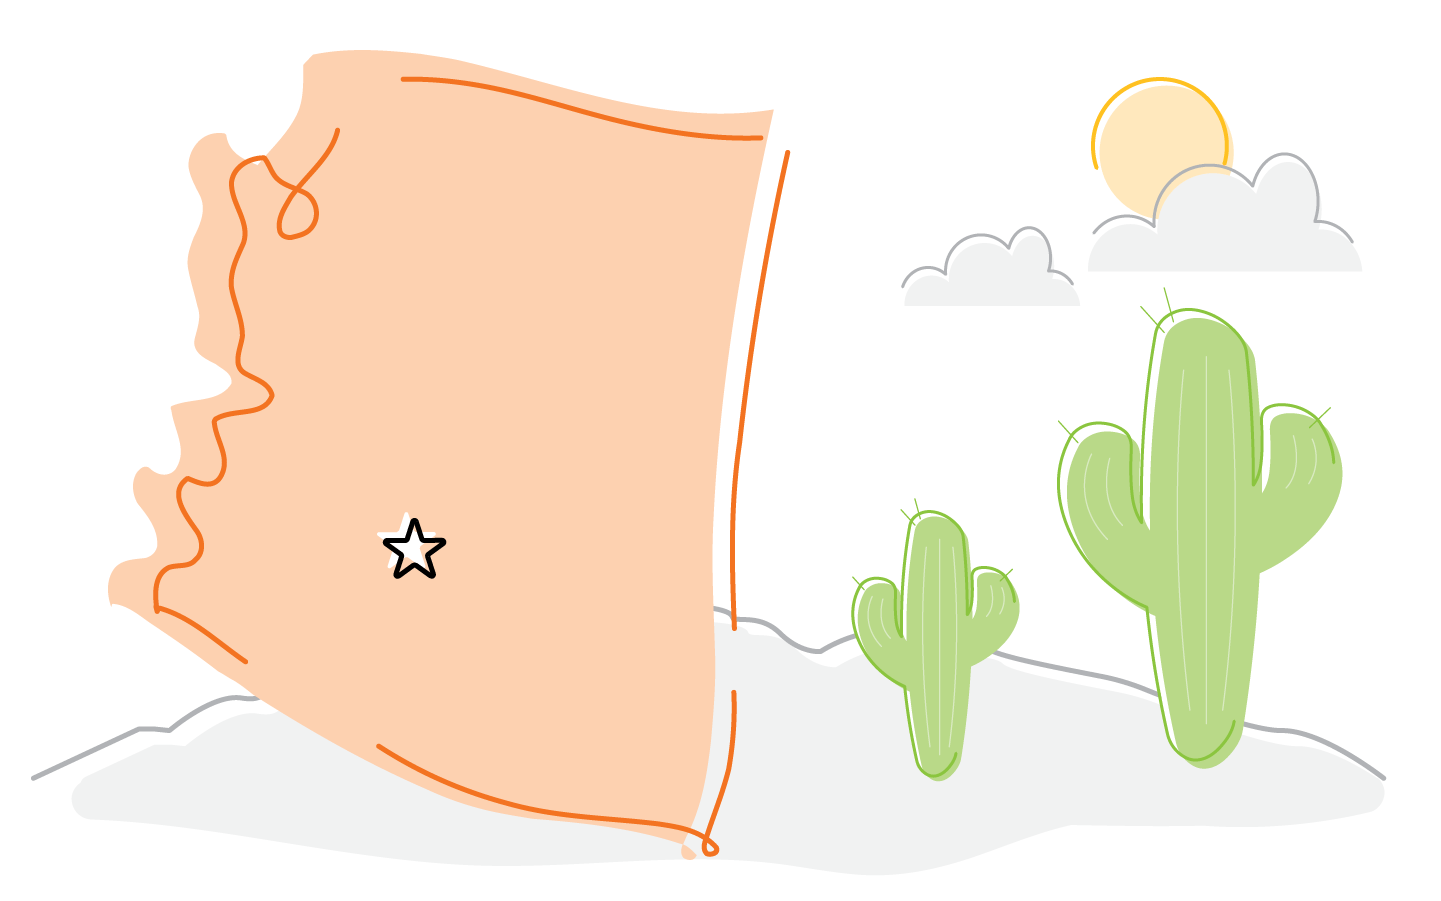 Illustration of a simplified map of arizona with a star on phoenix, featuring cacti and a stylized sun in the background.